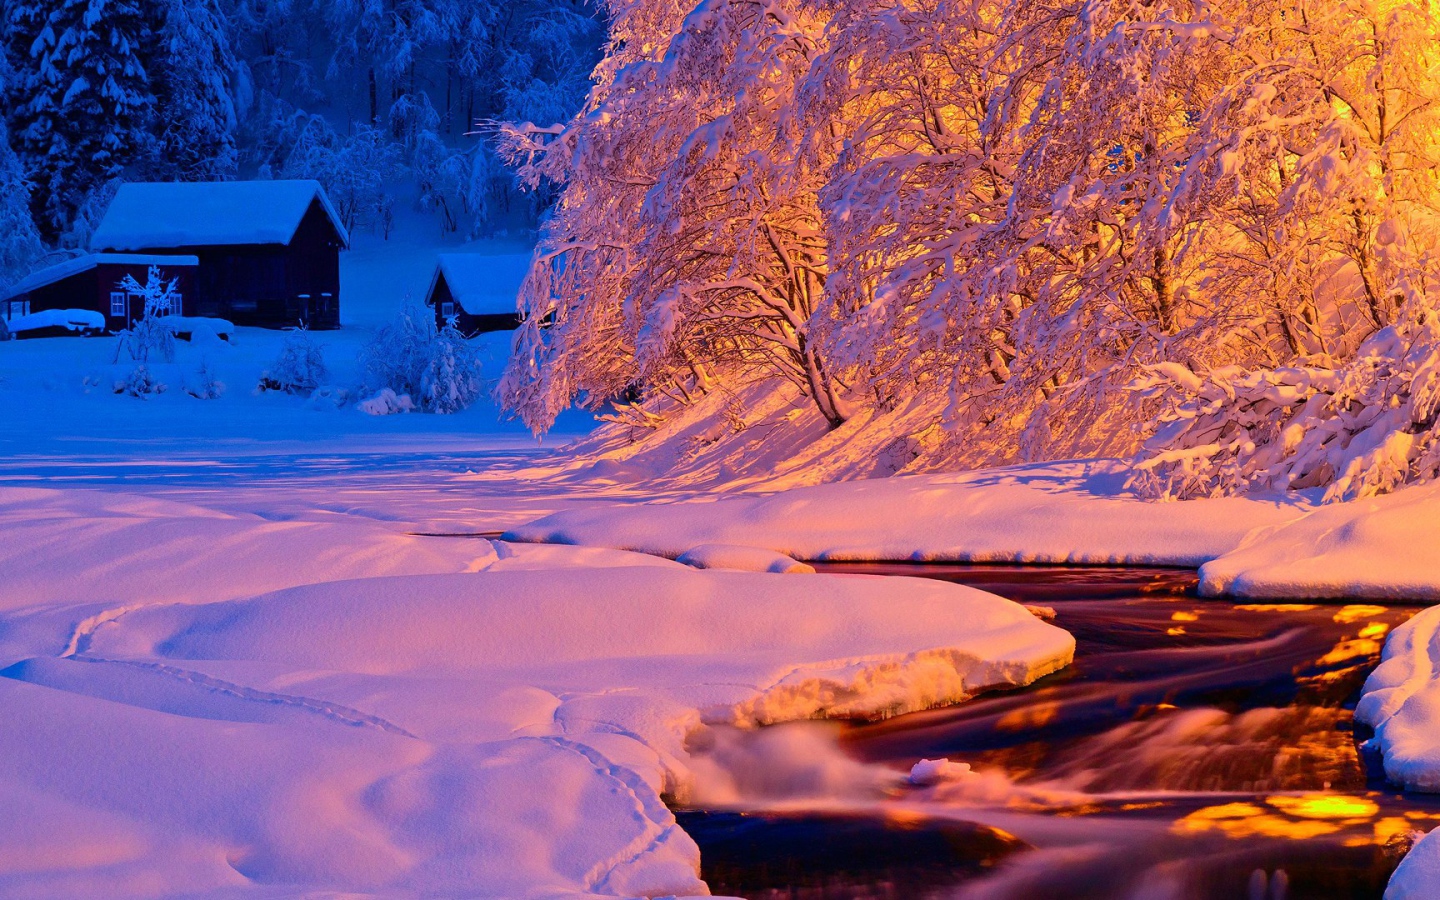 River in the snow